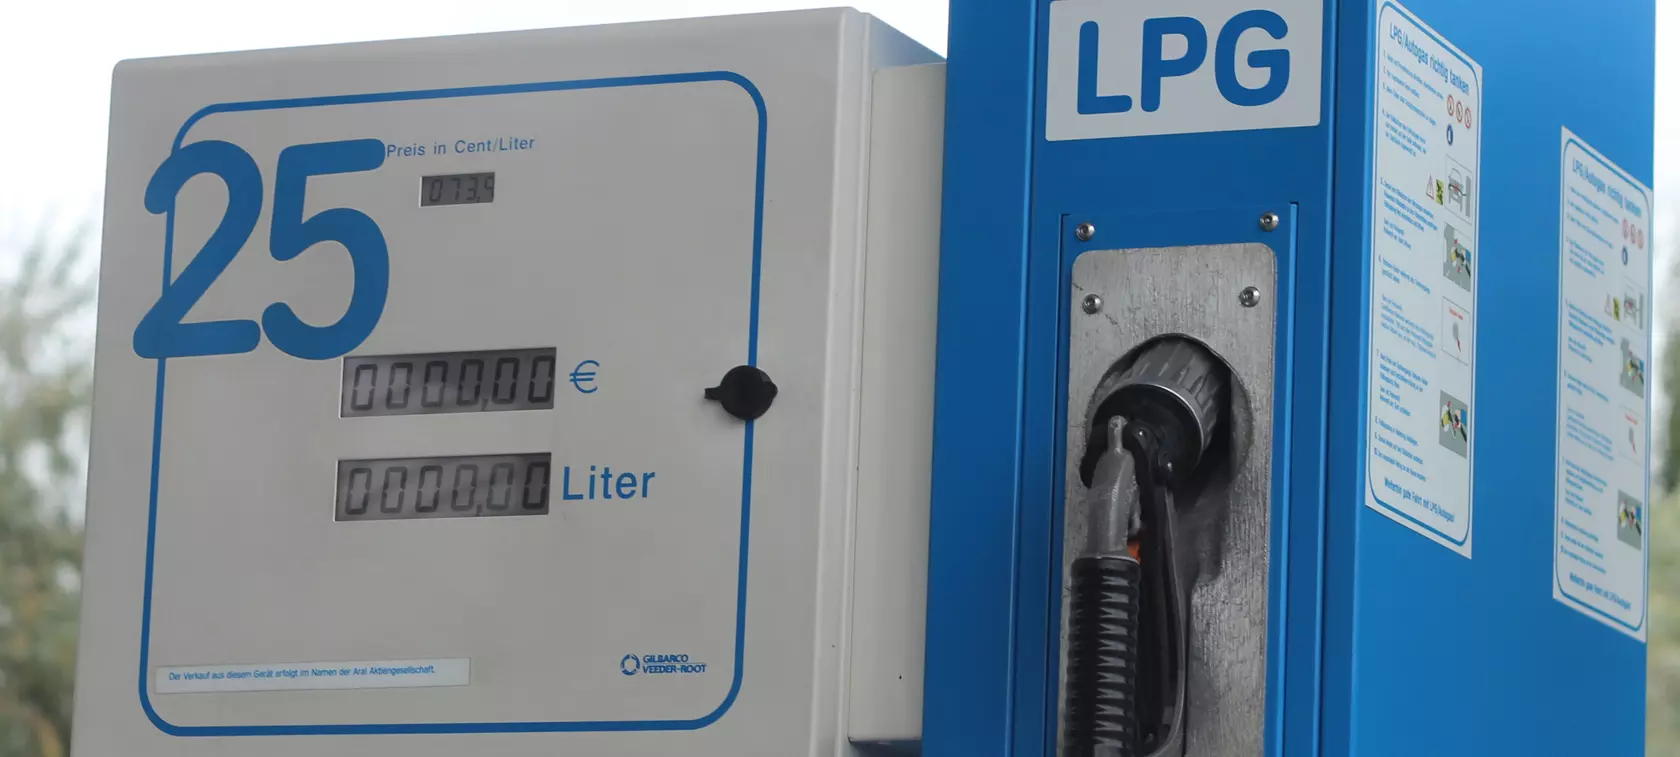 Autogas in Germany - the numbers